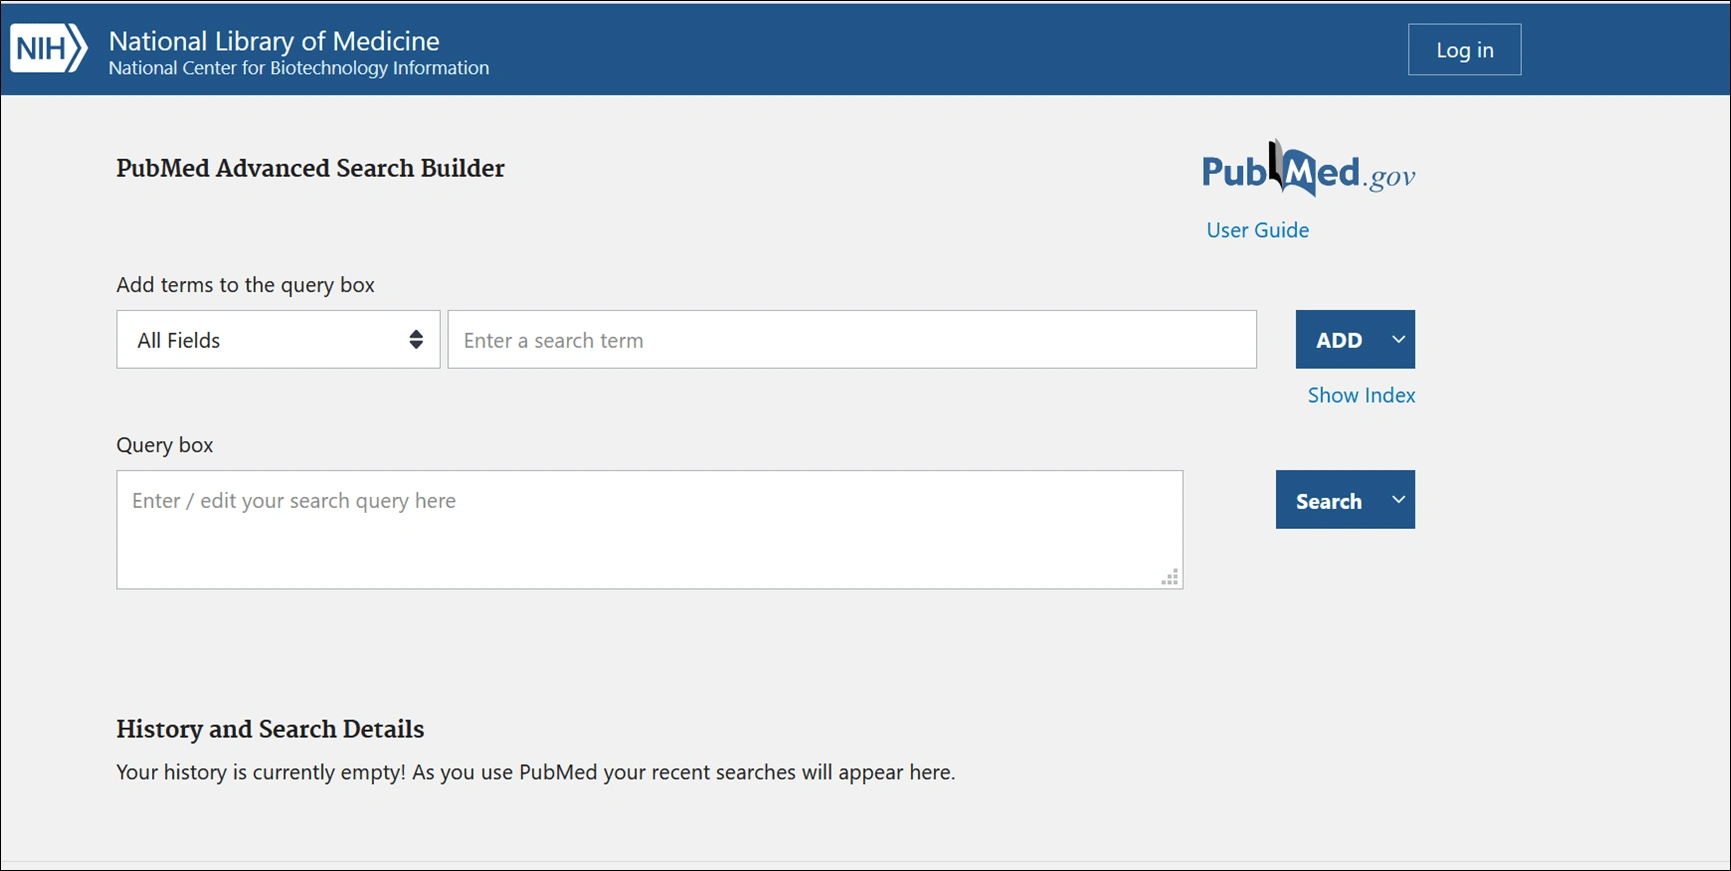 Image of Top Portion of Advanced Search Builder Page